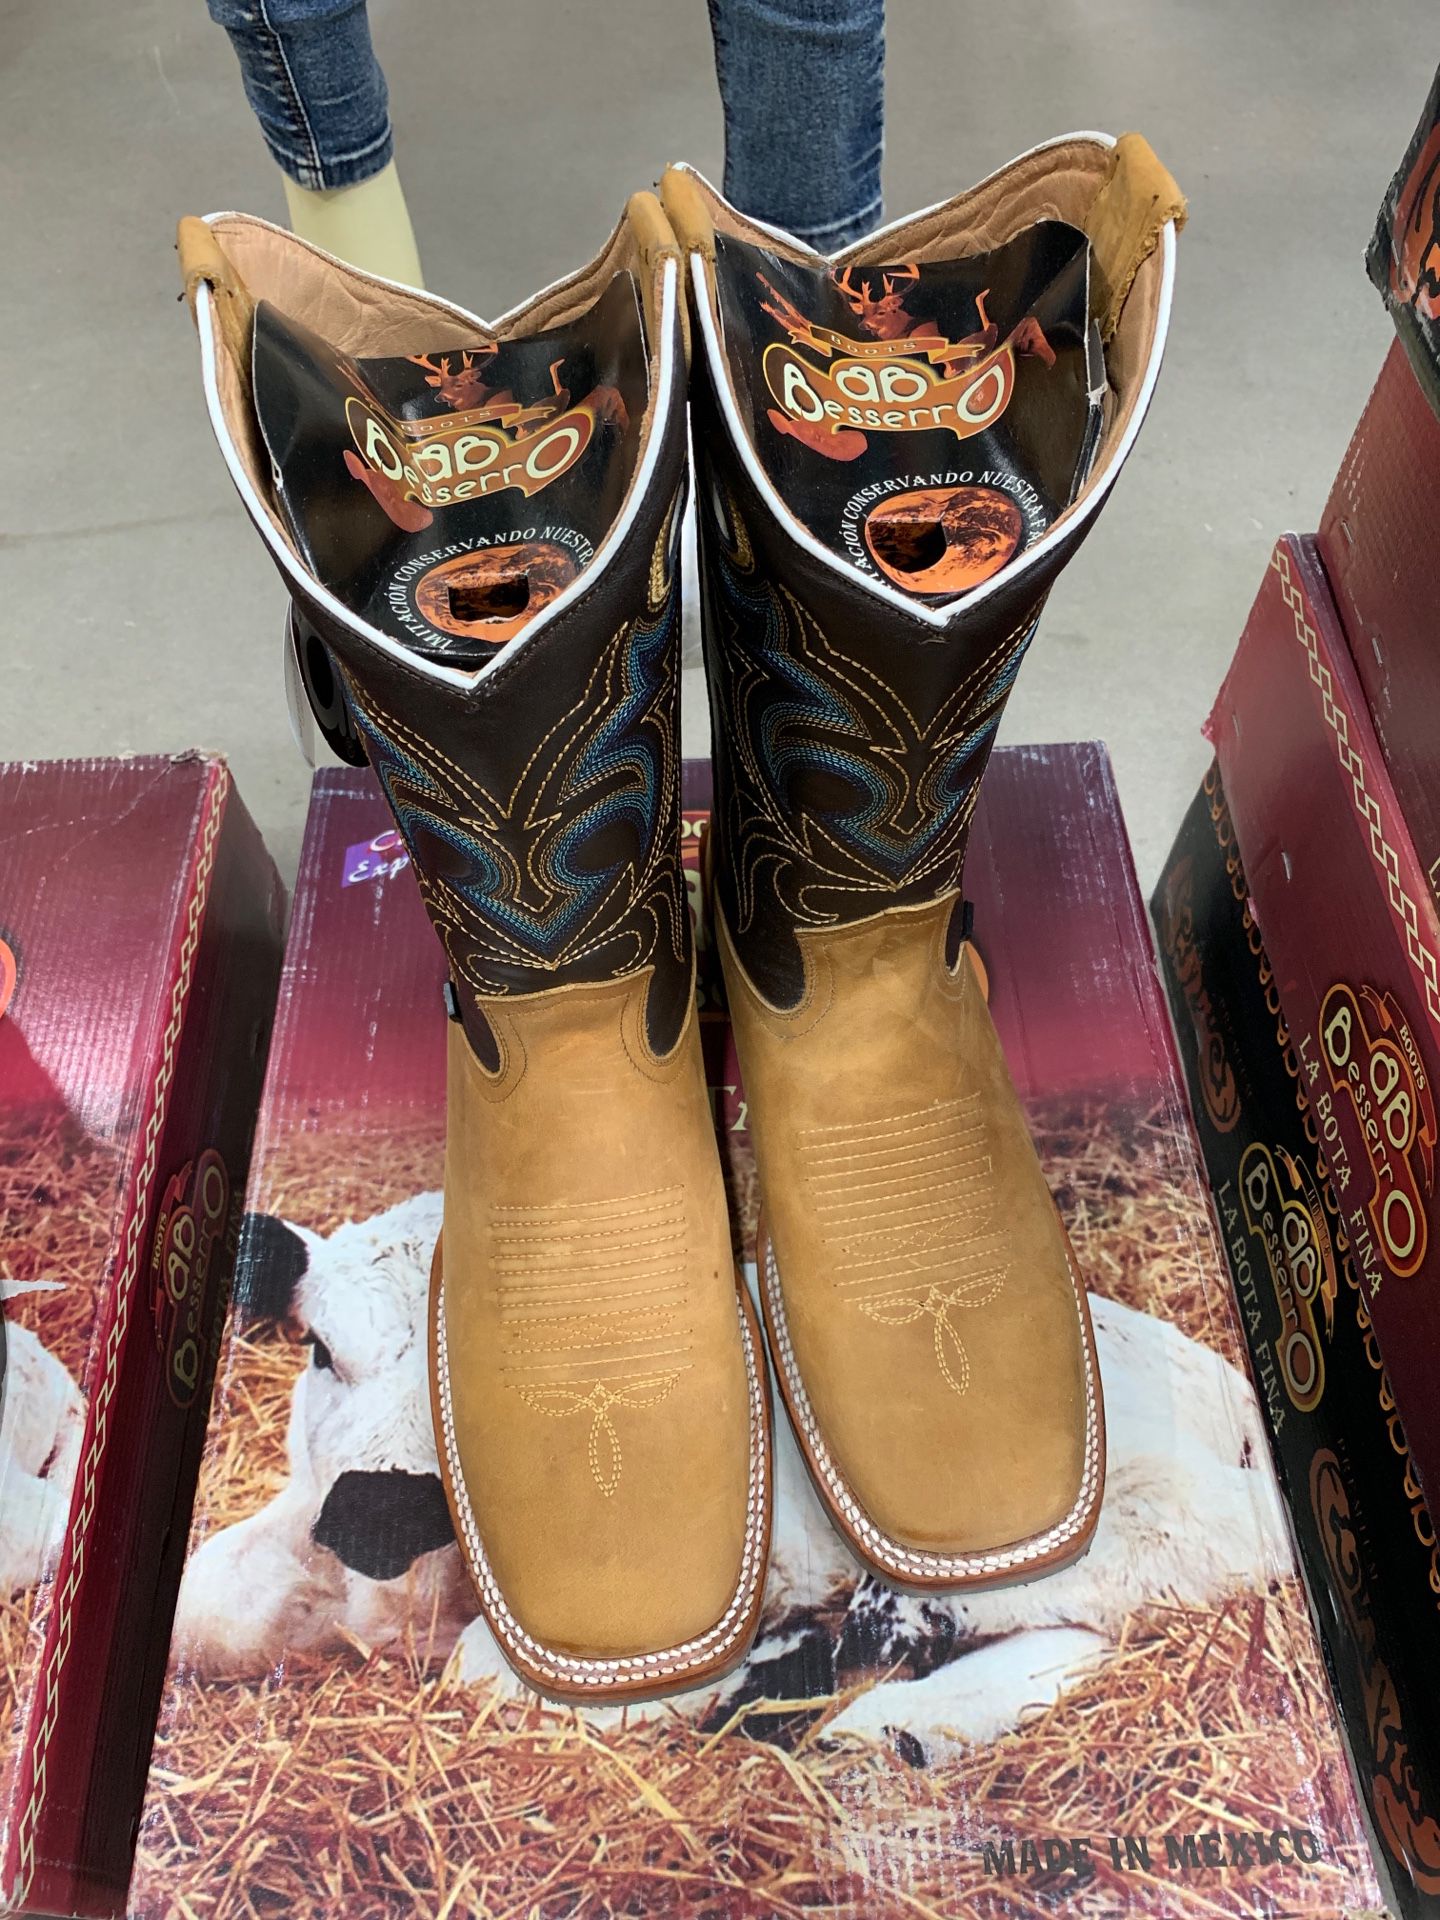 Rodeo boots